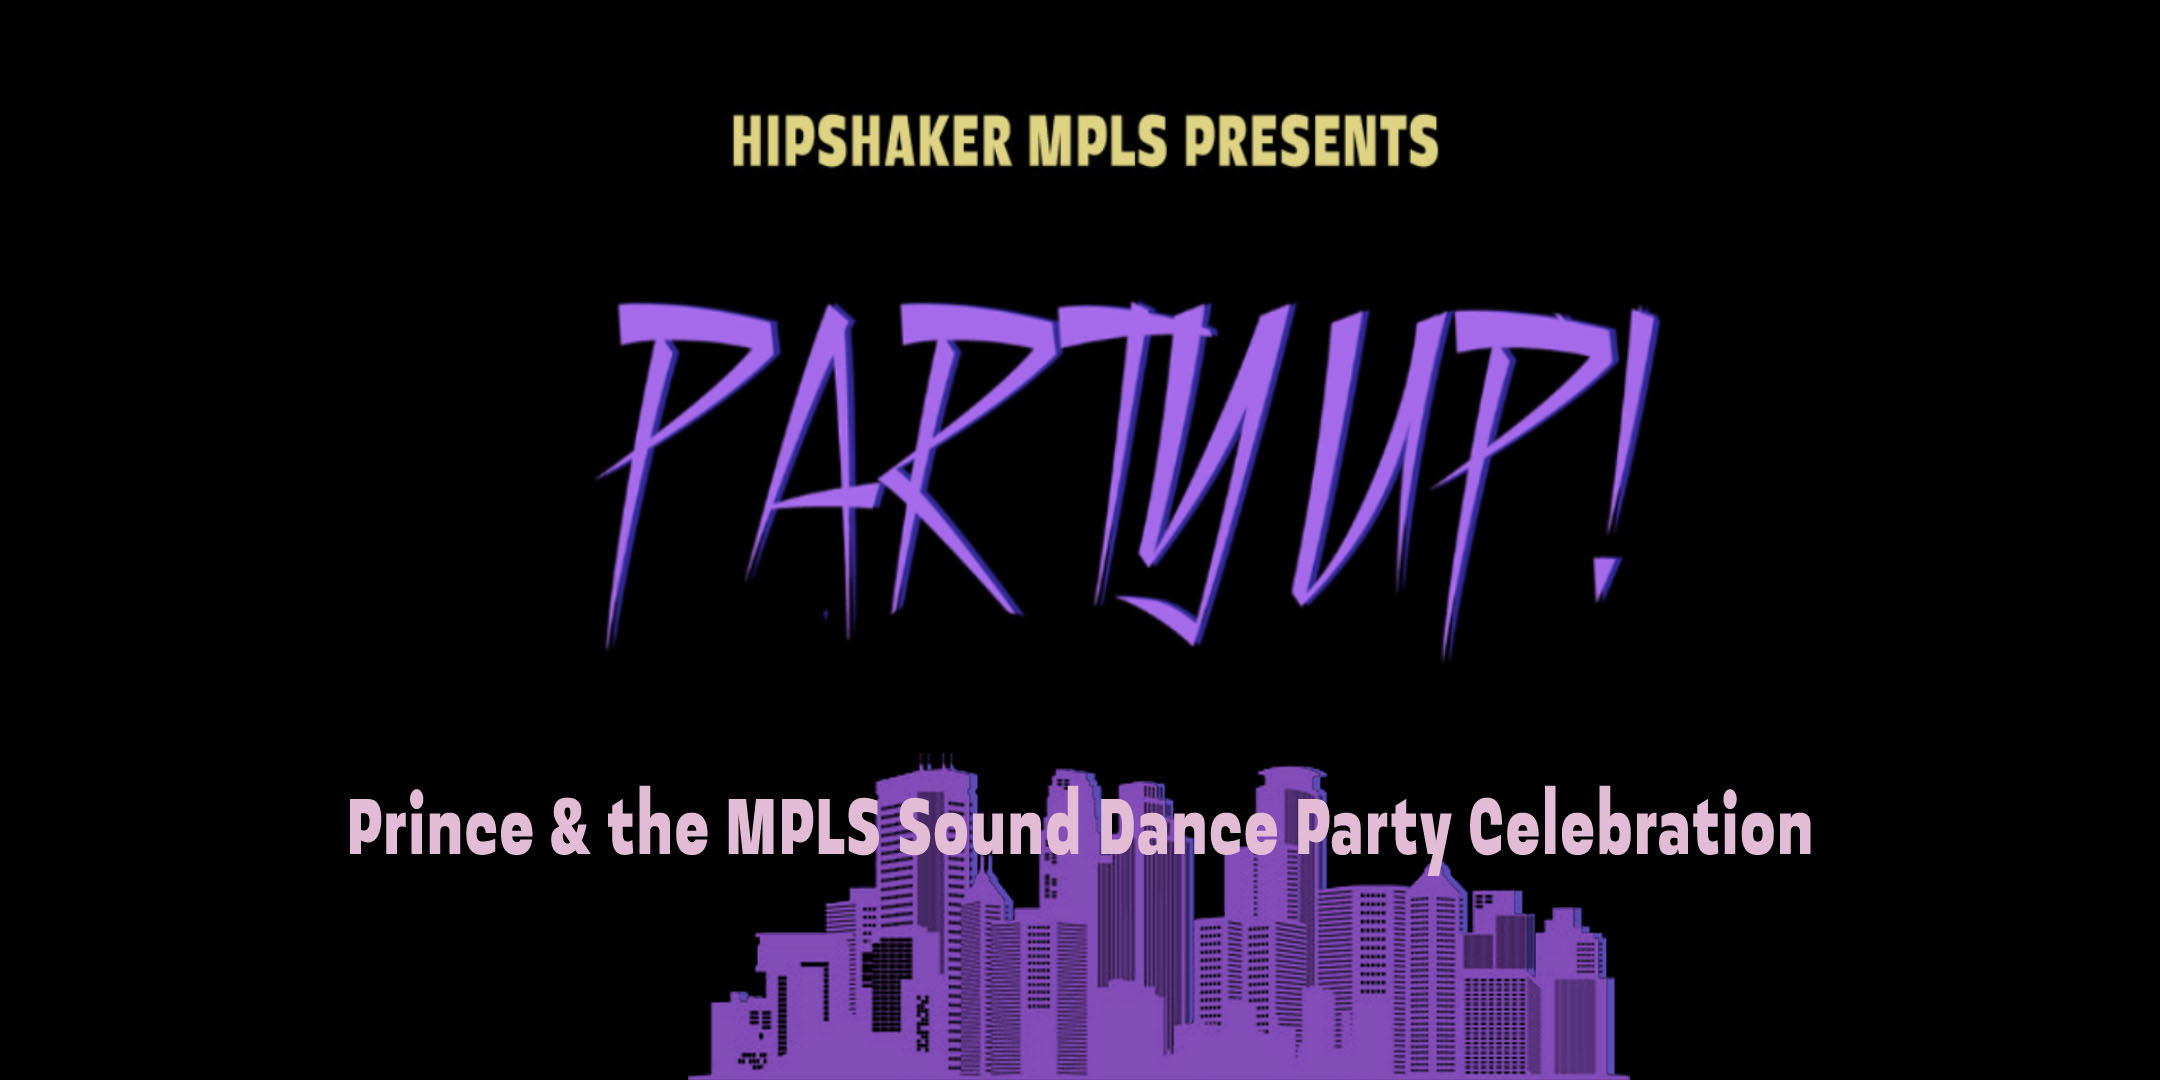 Hipshaker MPLS Presents: Partyup! Prince and the MPLS Sound Dance Party DJs Brian Engel, Noah Kurth Friday, August 4 James Ballentine "Uptown" VFW Post 246 Doors 10:00pm :: Music 10:00pm :: 21+ GA $10 ADV / $15 DOS NO REFUNDS